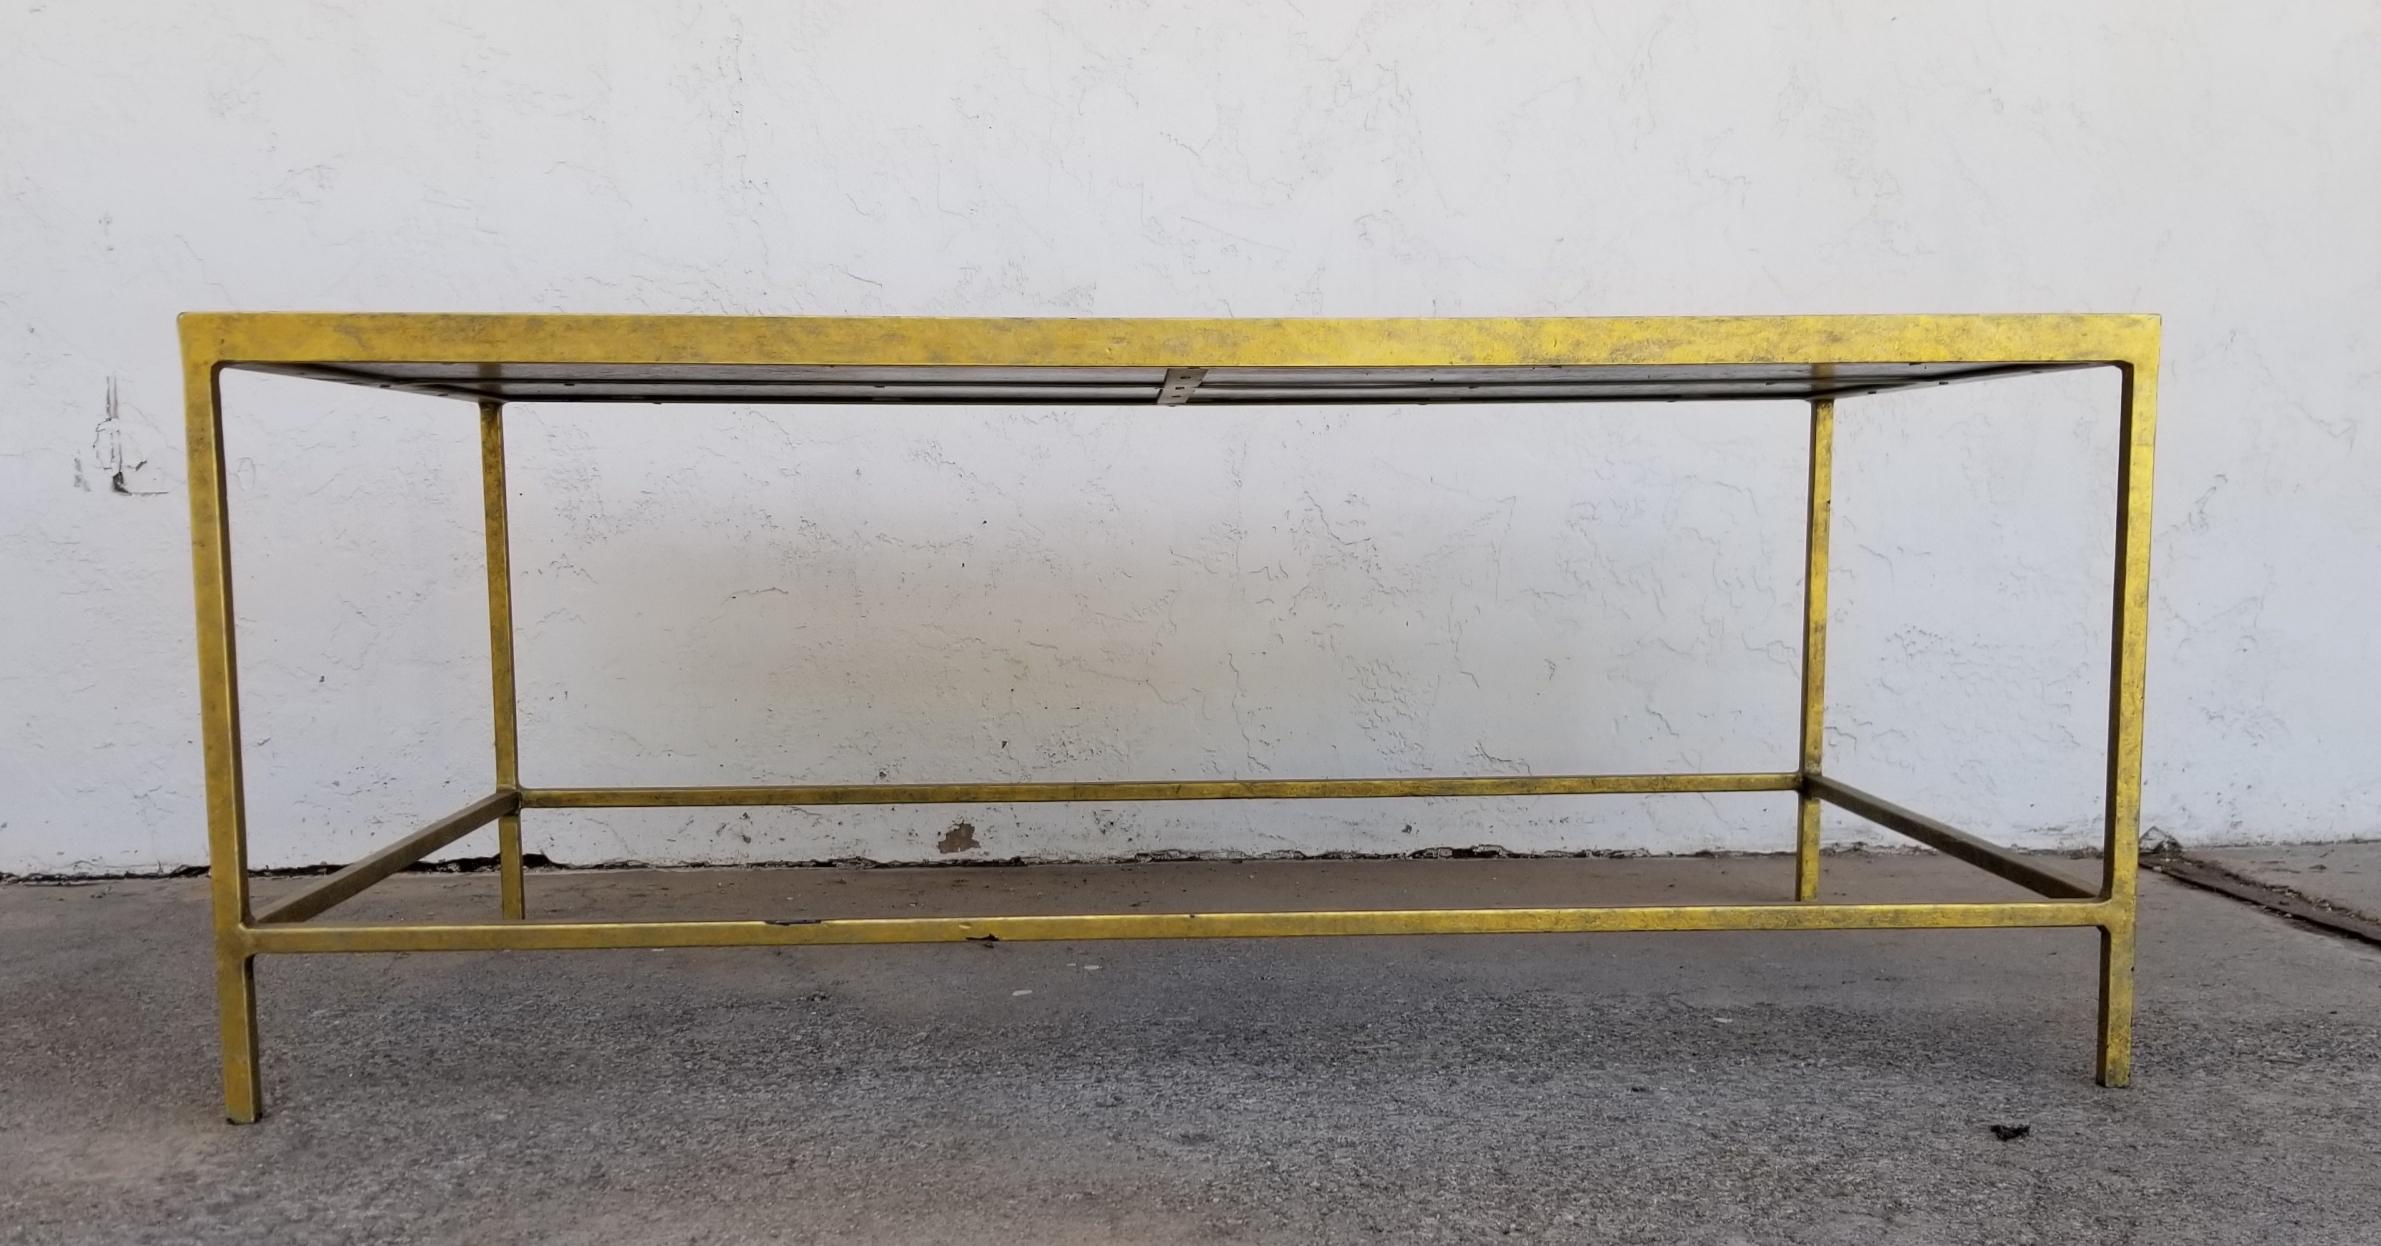 Elegant tortoise shell rectangular coffee table with gold finish to welded iron base. Created by Oly Studio, late 20th century. Makers mark on base. Age appropriate wear.